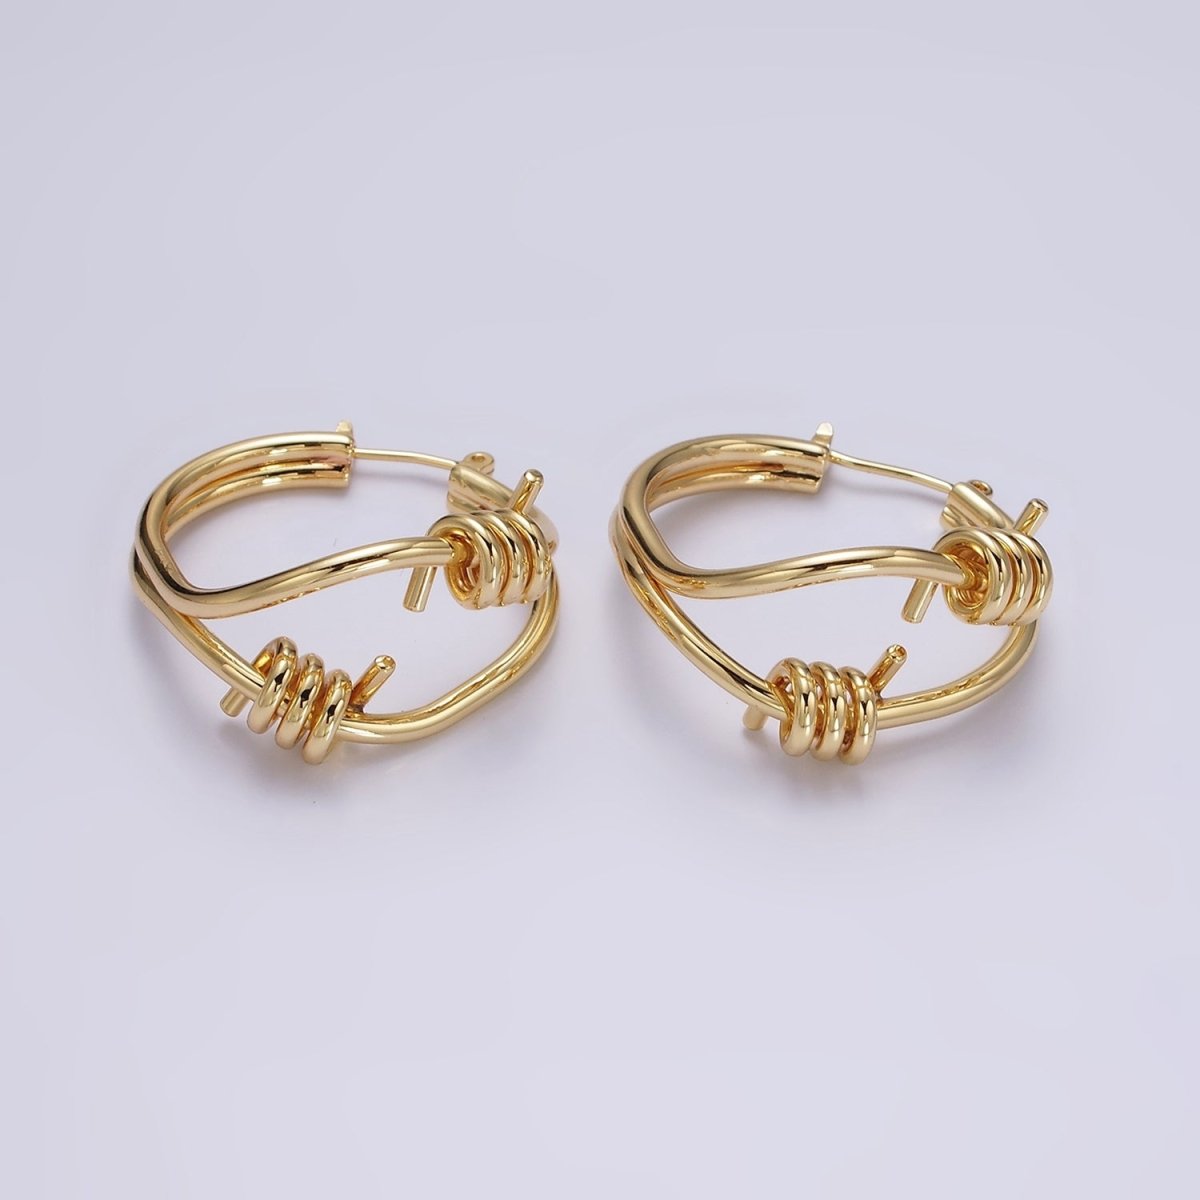 24K Gold Filled 30mm Double Spiral Abstract Band French Lock Latch Hoop Earrings in Gold & Silver | AE090 AE091 - DLUXCA